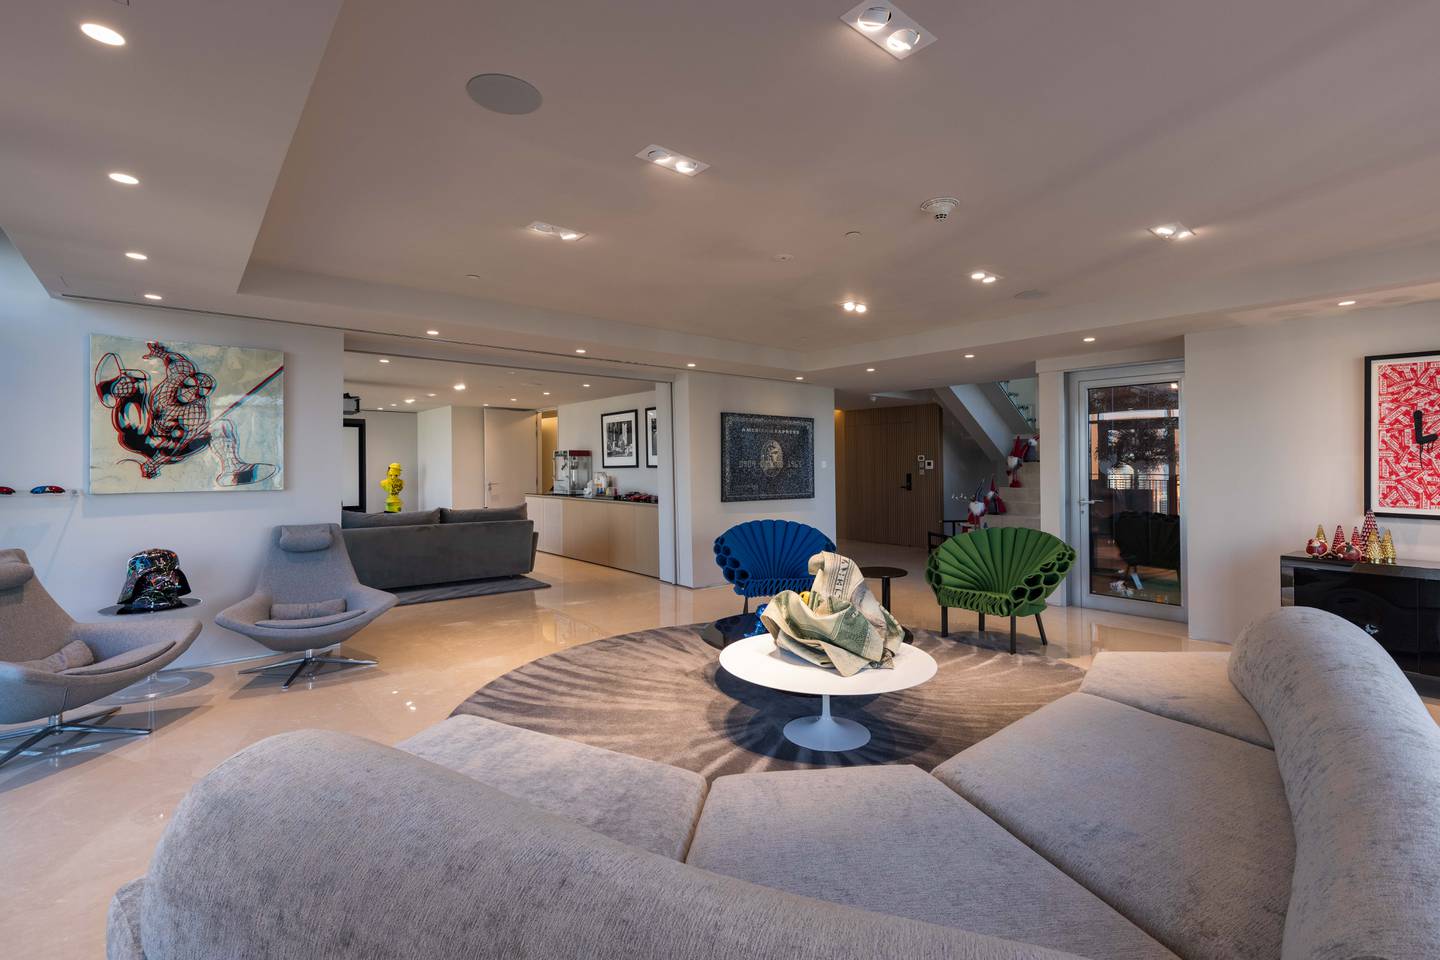 The penthouse is being sold furnished with pieces by luxury brands including Roche Bobois, Minotti, Fendi, Versace and Villeroy & Boch. Photo: Knight Frank